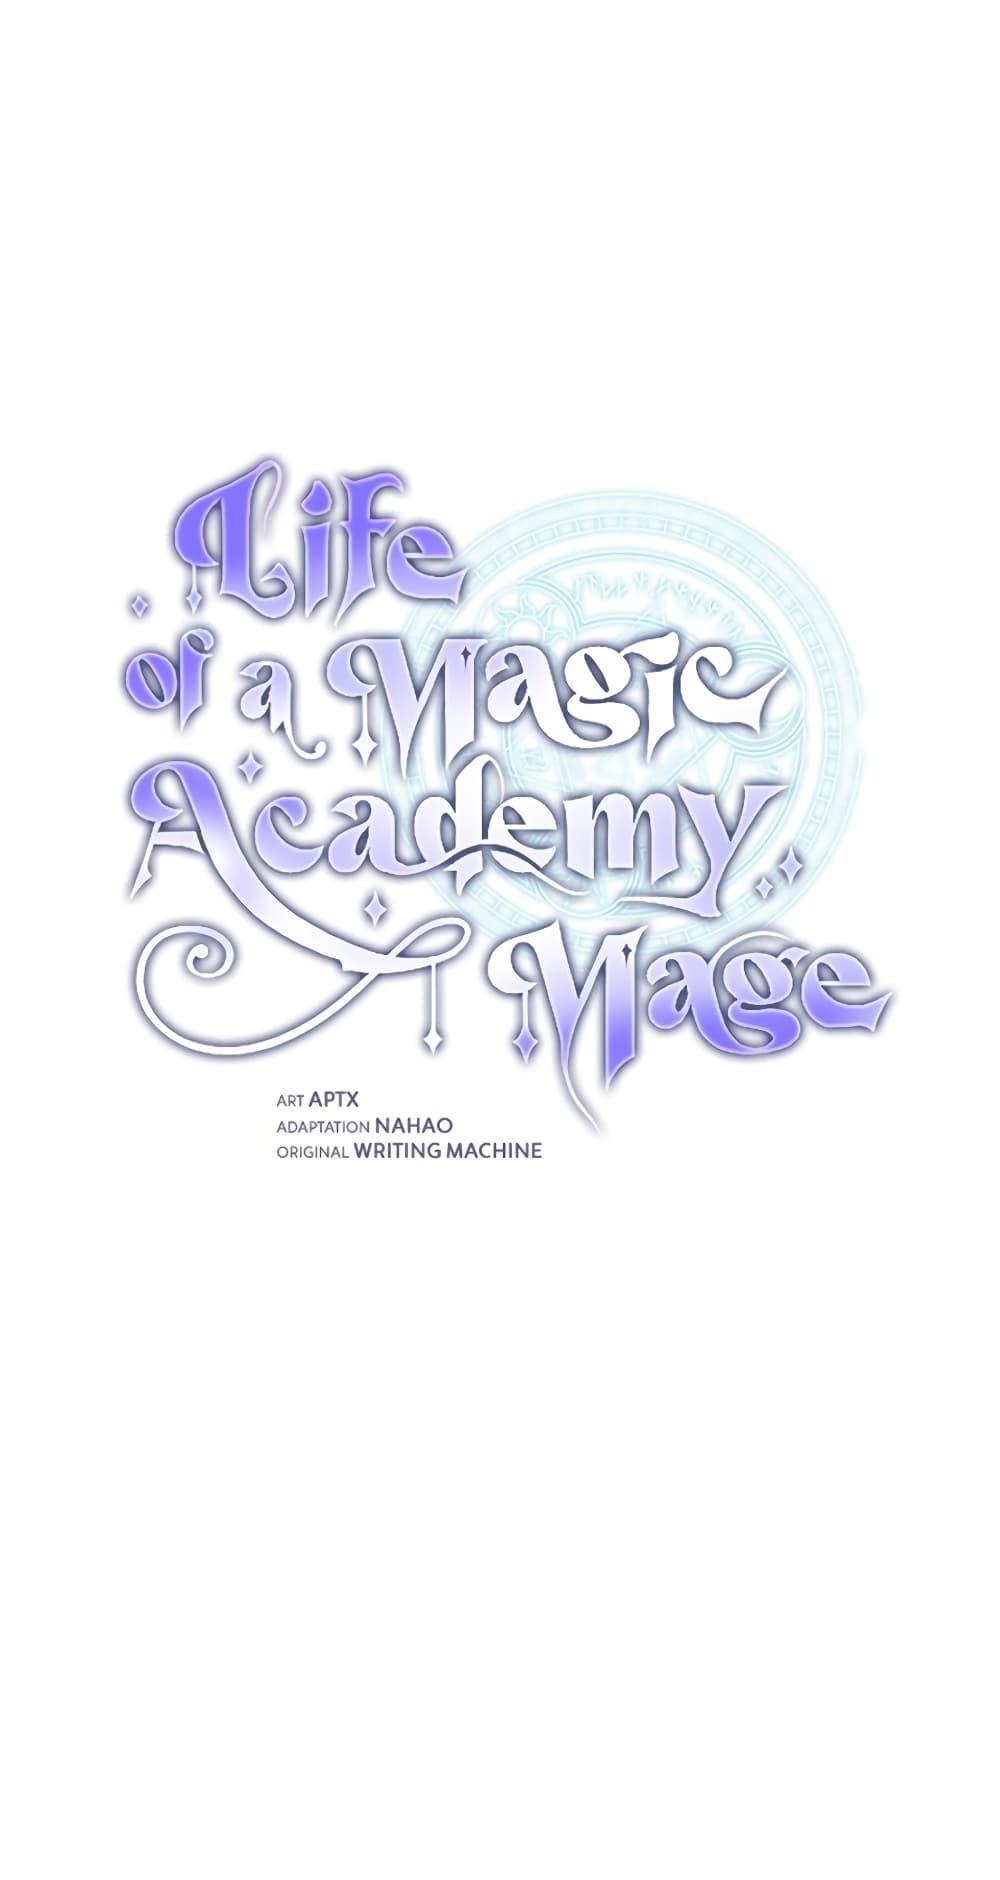 Life of a Magic Academy Mage 36 06